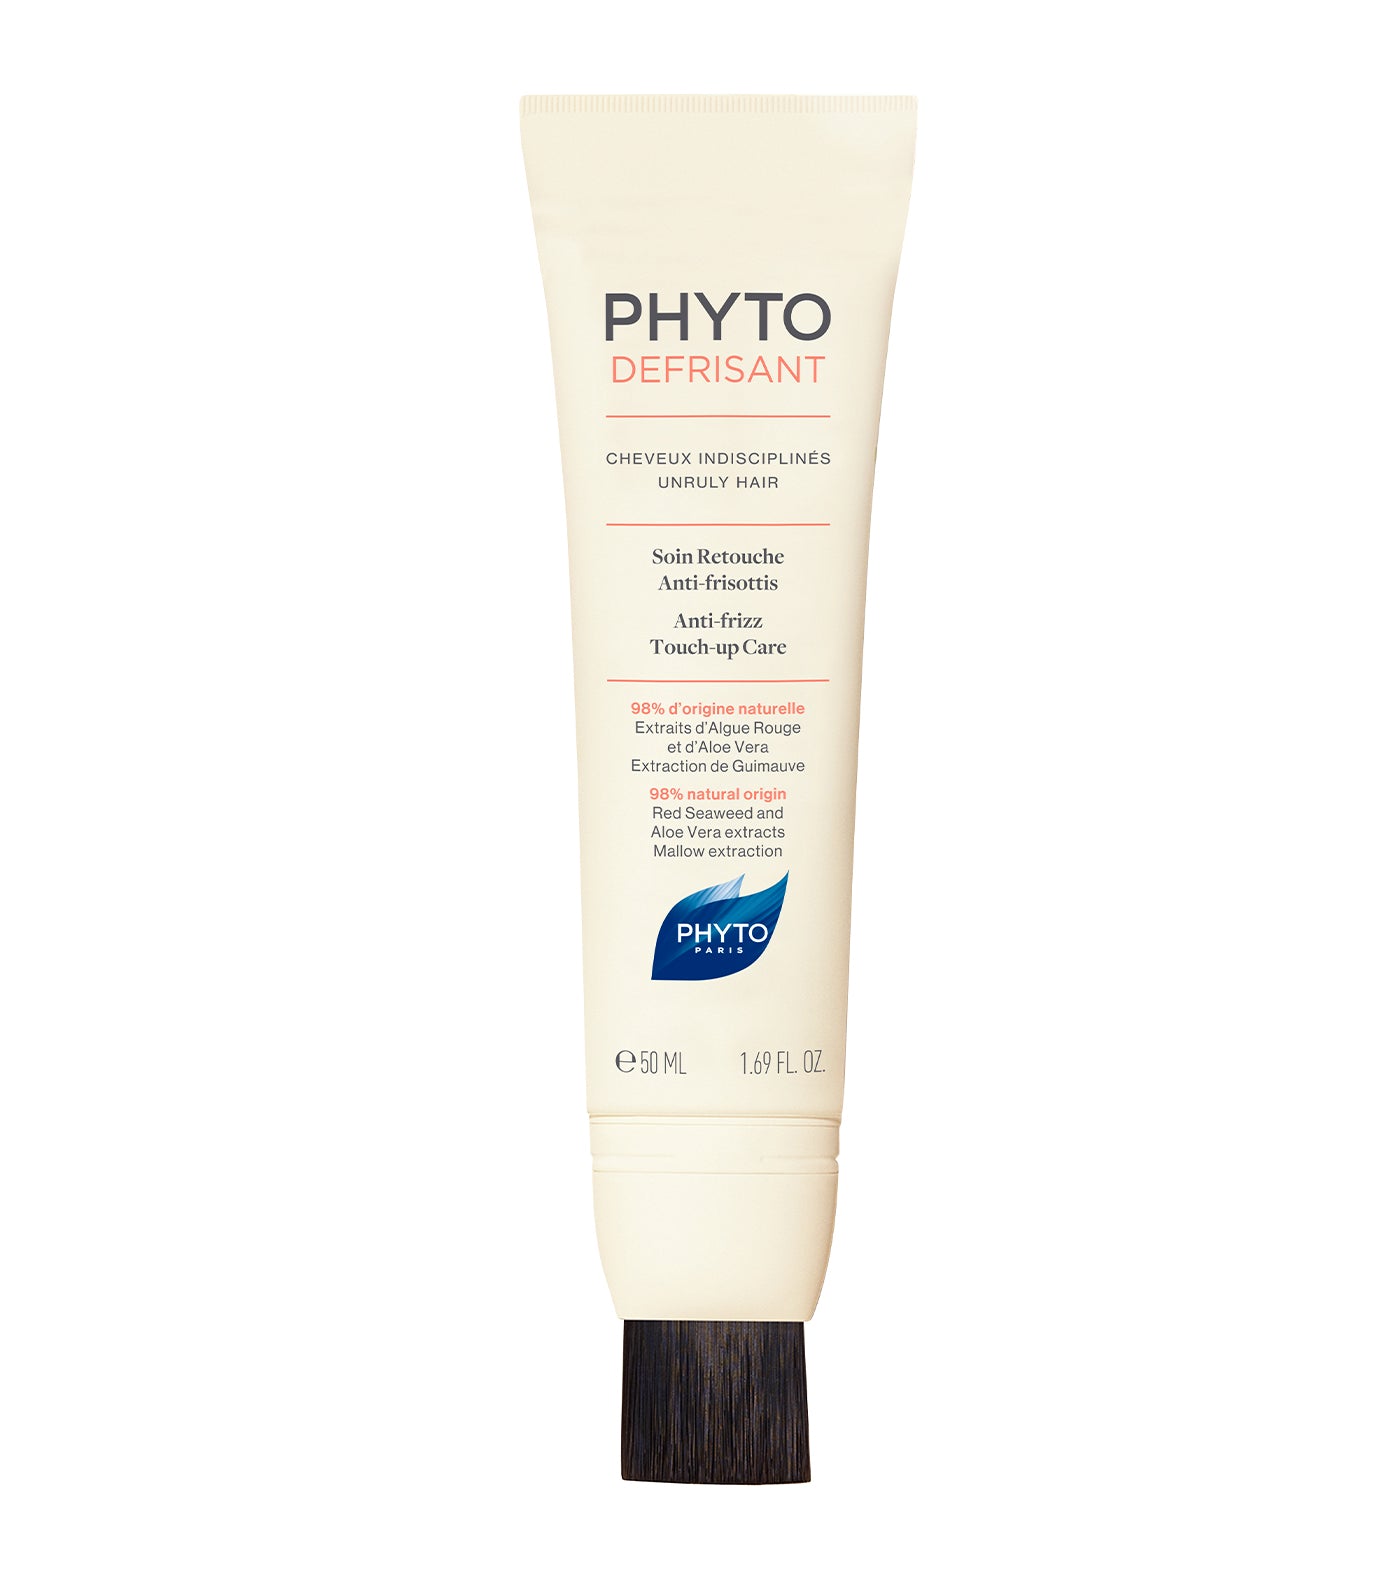 Phytodefrisant Anti-Frizz Touch-up Care